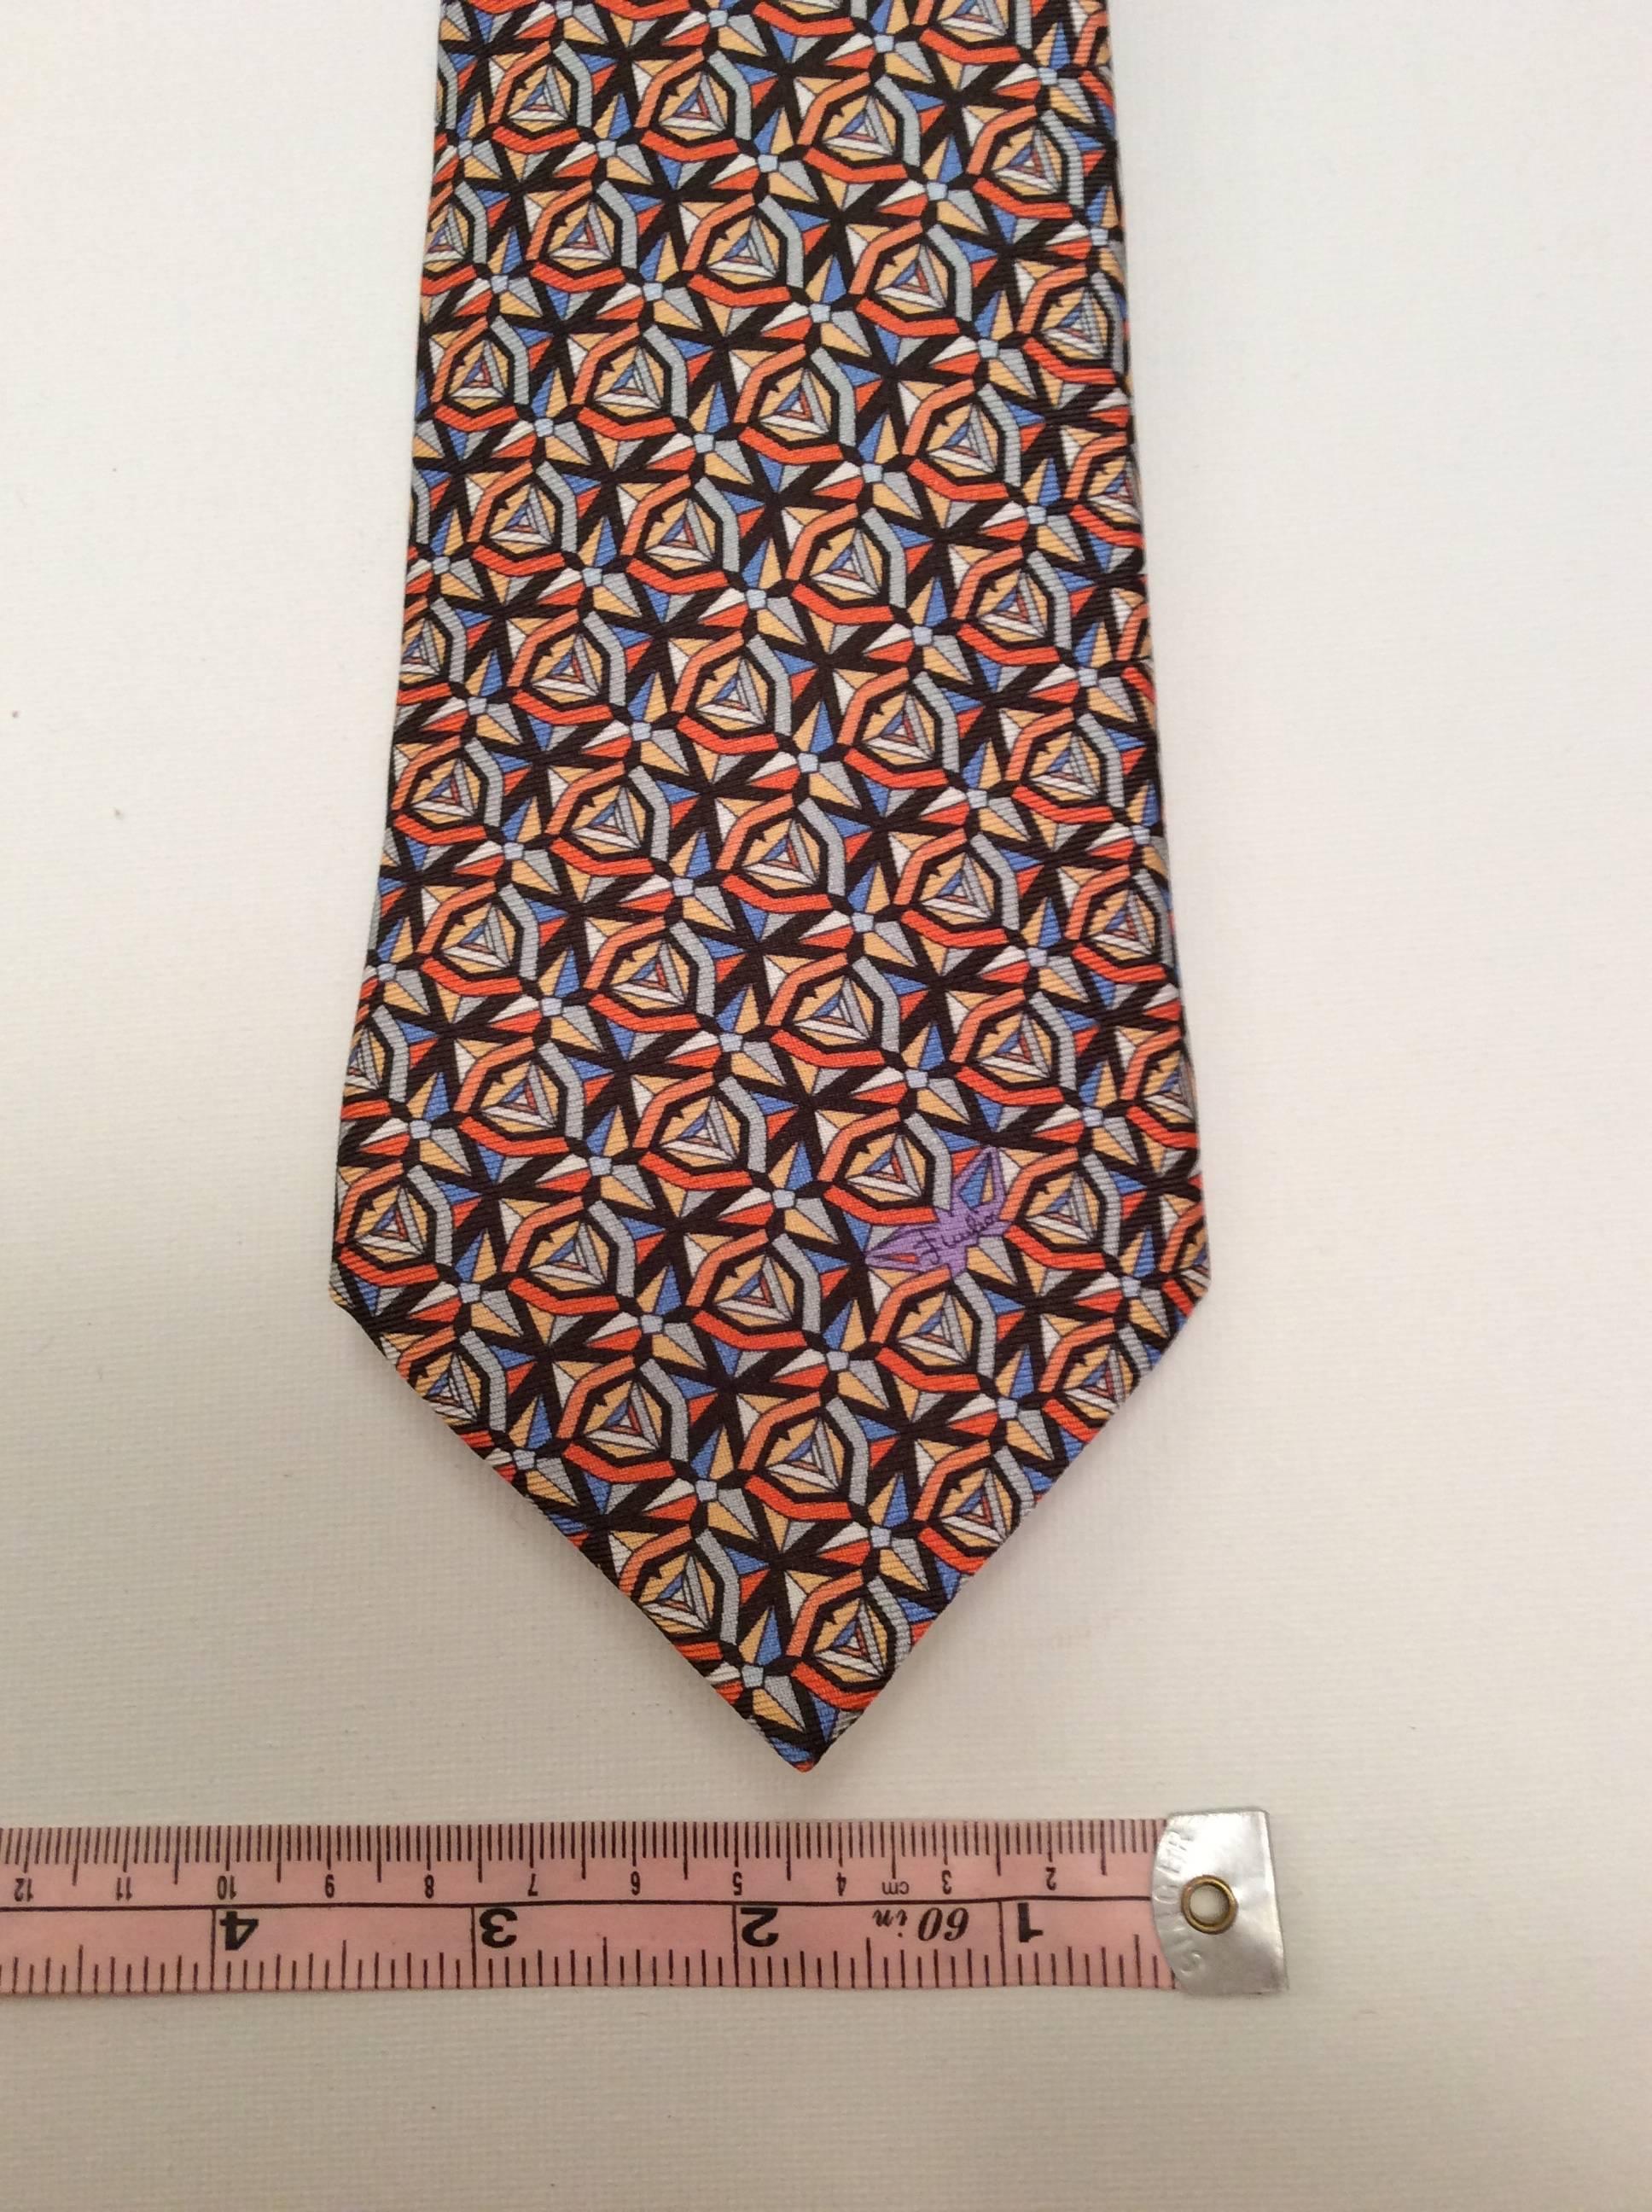 This Emilio Pucci necktie is made of 100% silk and is a clear example of the pure artistry exhibited by Emilio Pucci. Gorgeous rare necktie that is signed on the from throughout the pattern and on the back of the tie as well. Tie is in mint